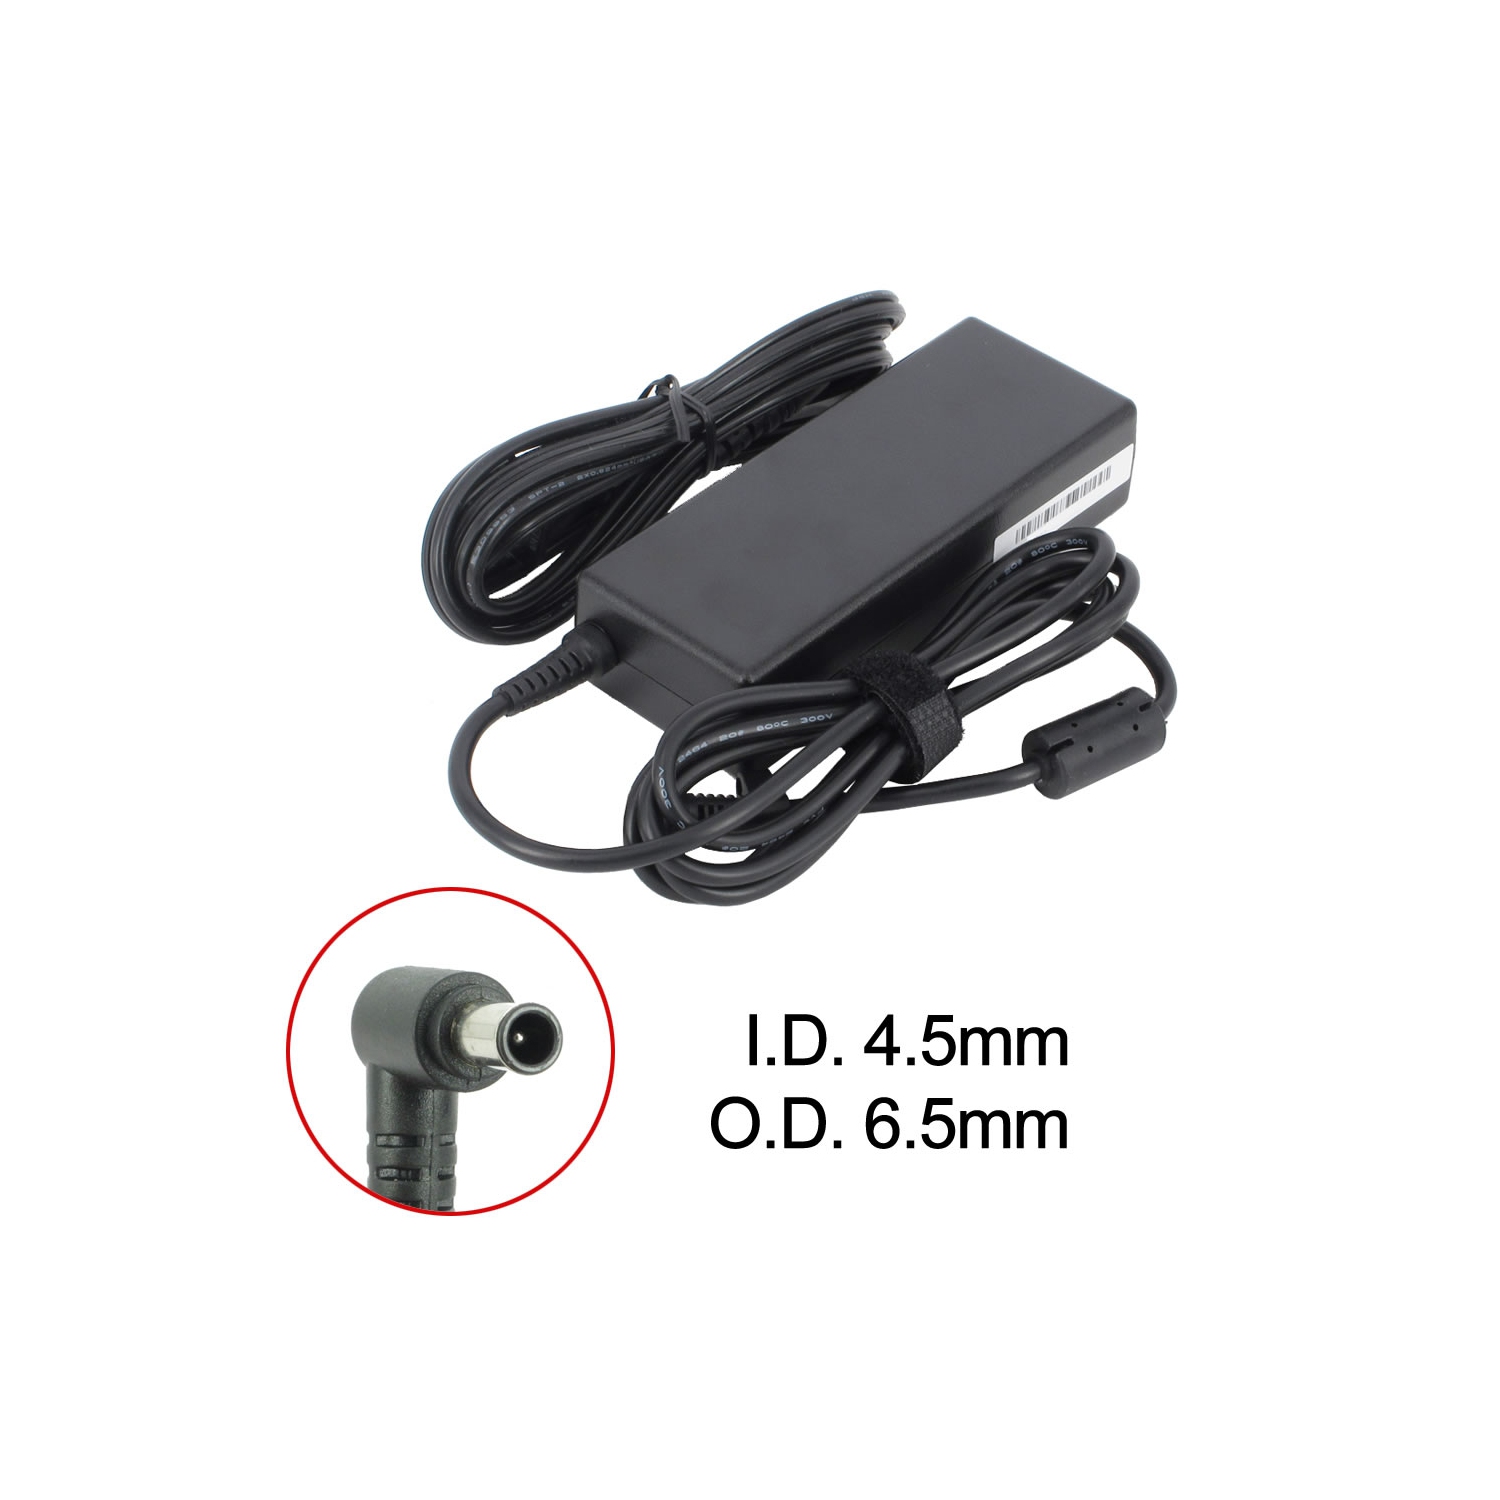 Brand New Laptop AC Adapter for LG XNOTE A505, ADP-90TH A, PCGA-AC19V19, VGP-AC19V14, VGP-AC19V26, VGP-AC19V43